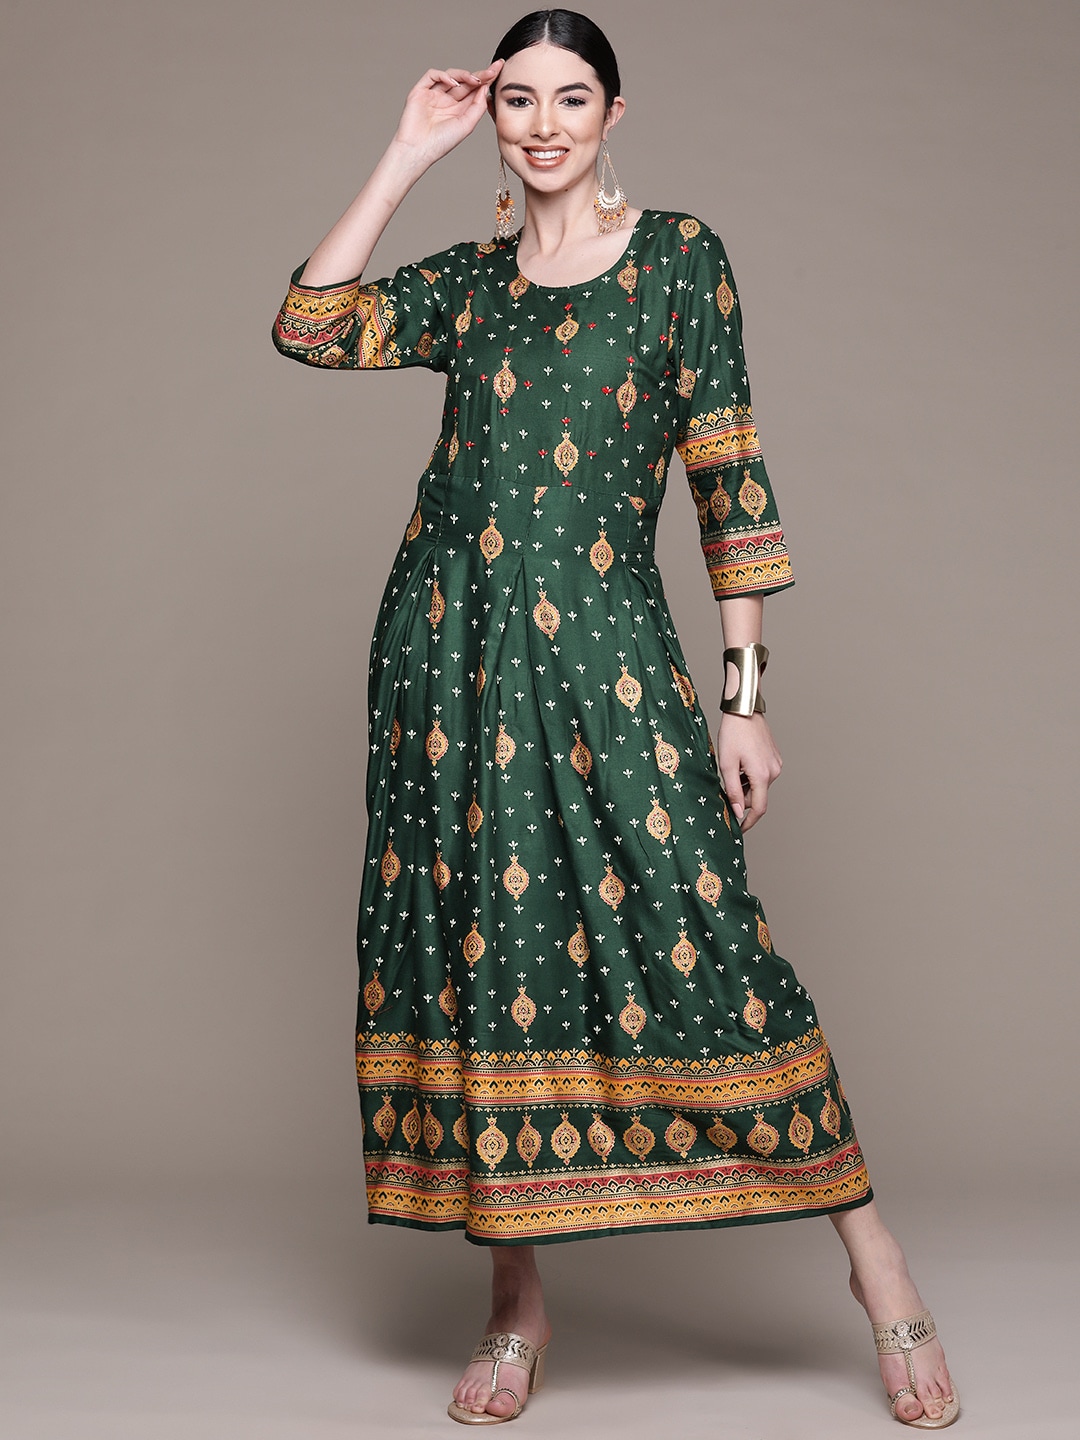 Anubhutee Green Ethnic Motifs Ethnic A-Line Maxi Dress Price in India